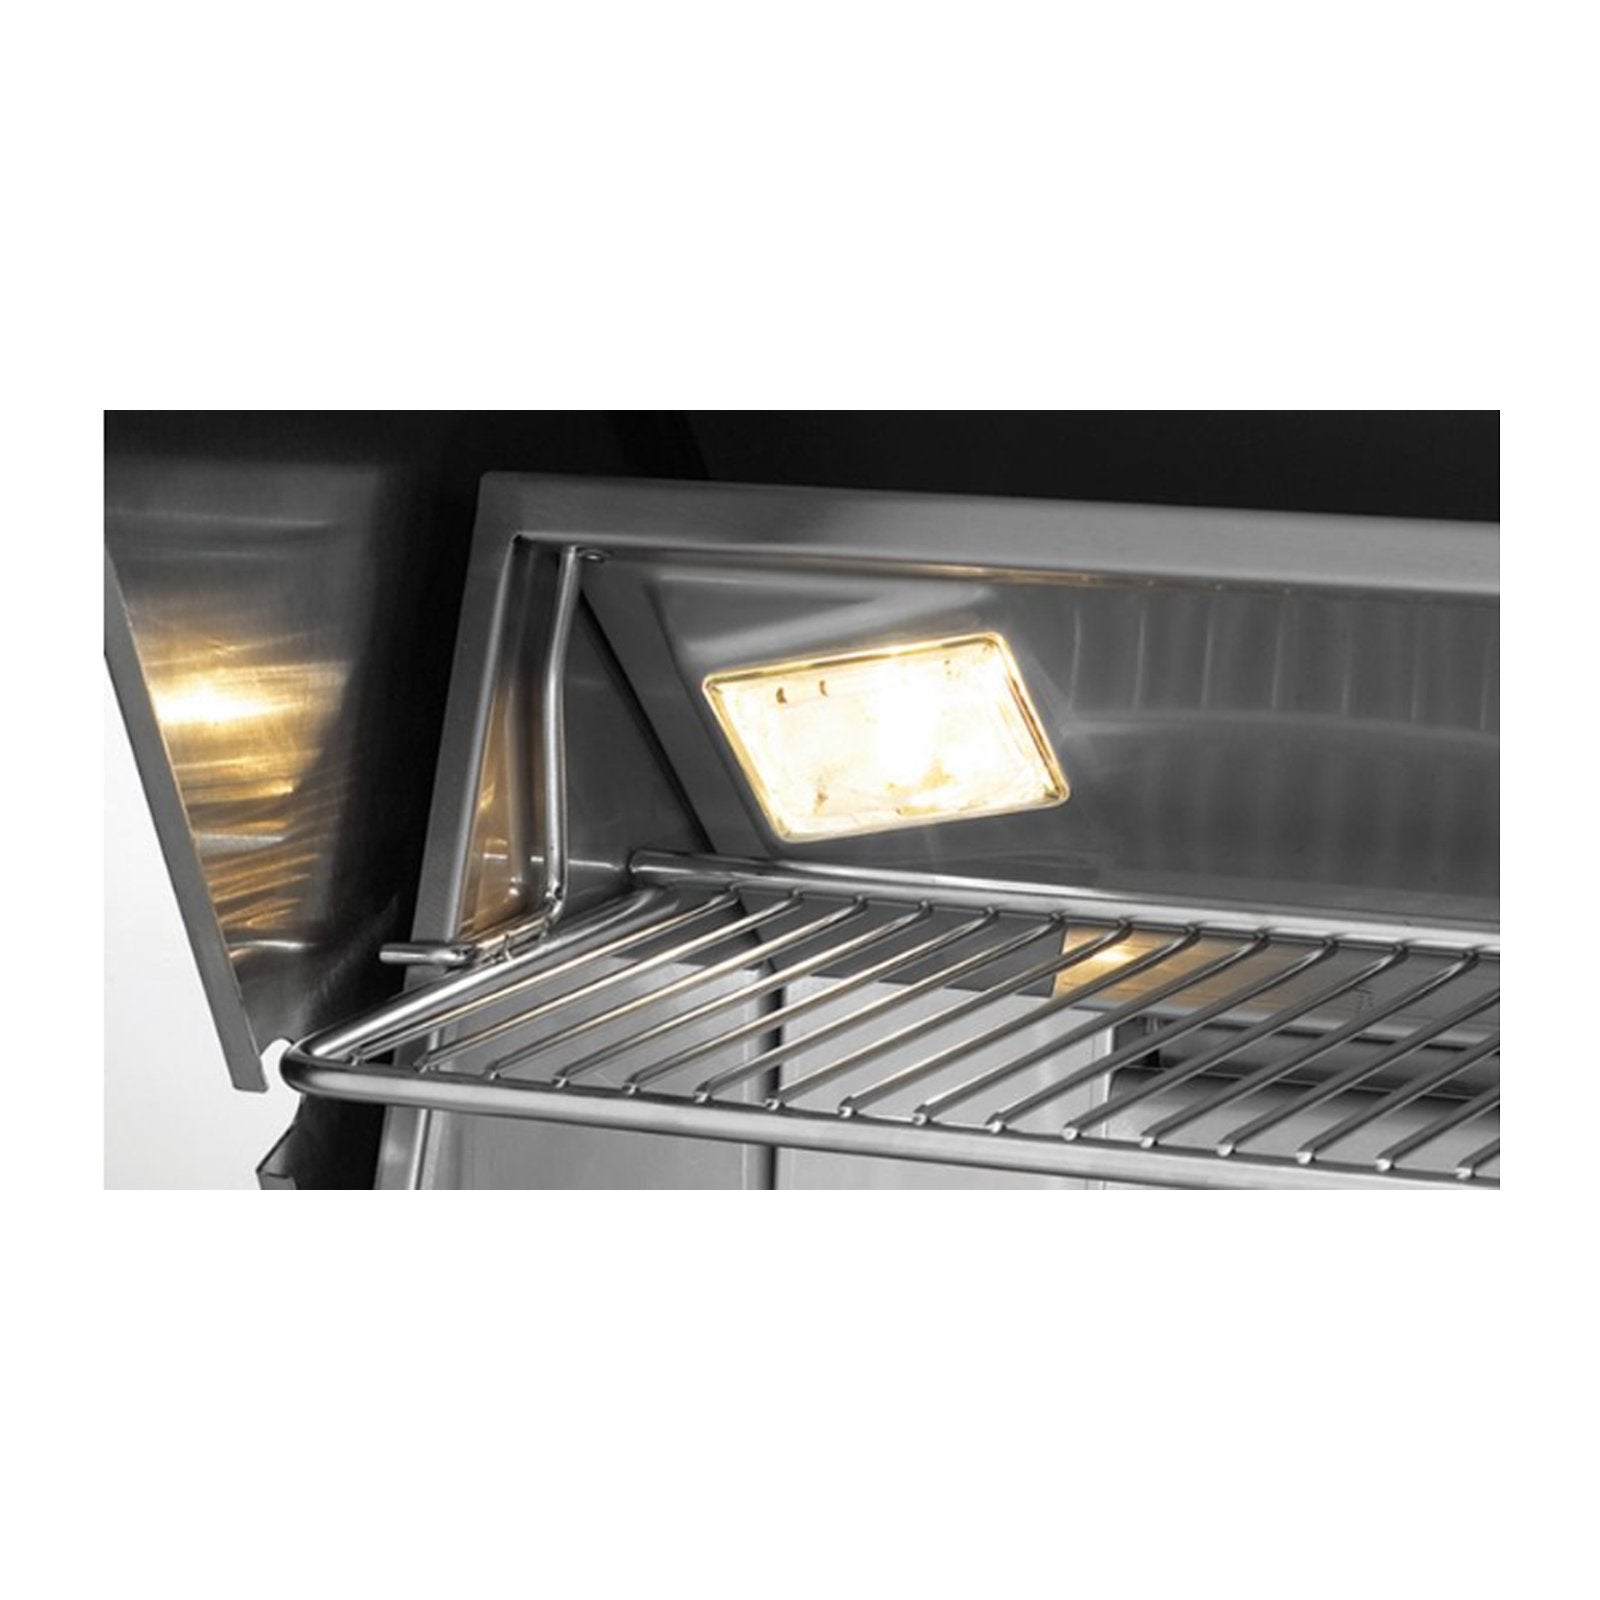 fire-magic-a830s-46-inch-gas-and-charcoal-built-in-combo-grill-w-infrared-burner-analog-therm-a830i-7lan-cb 8